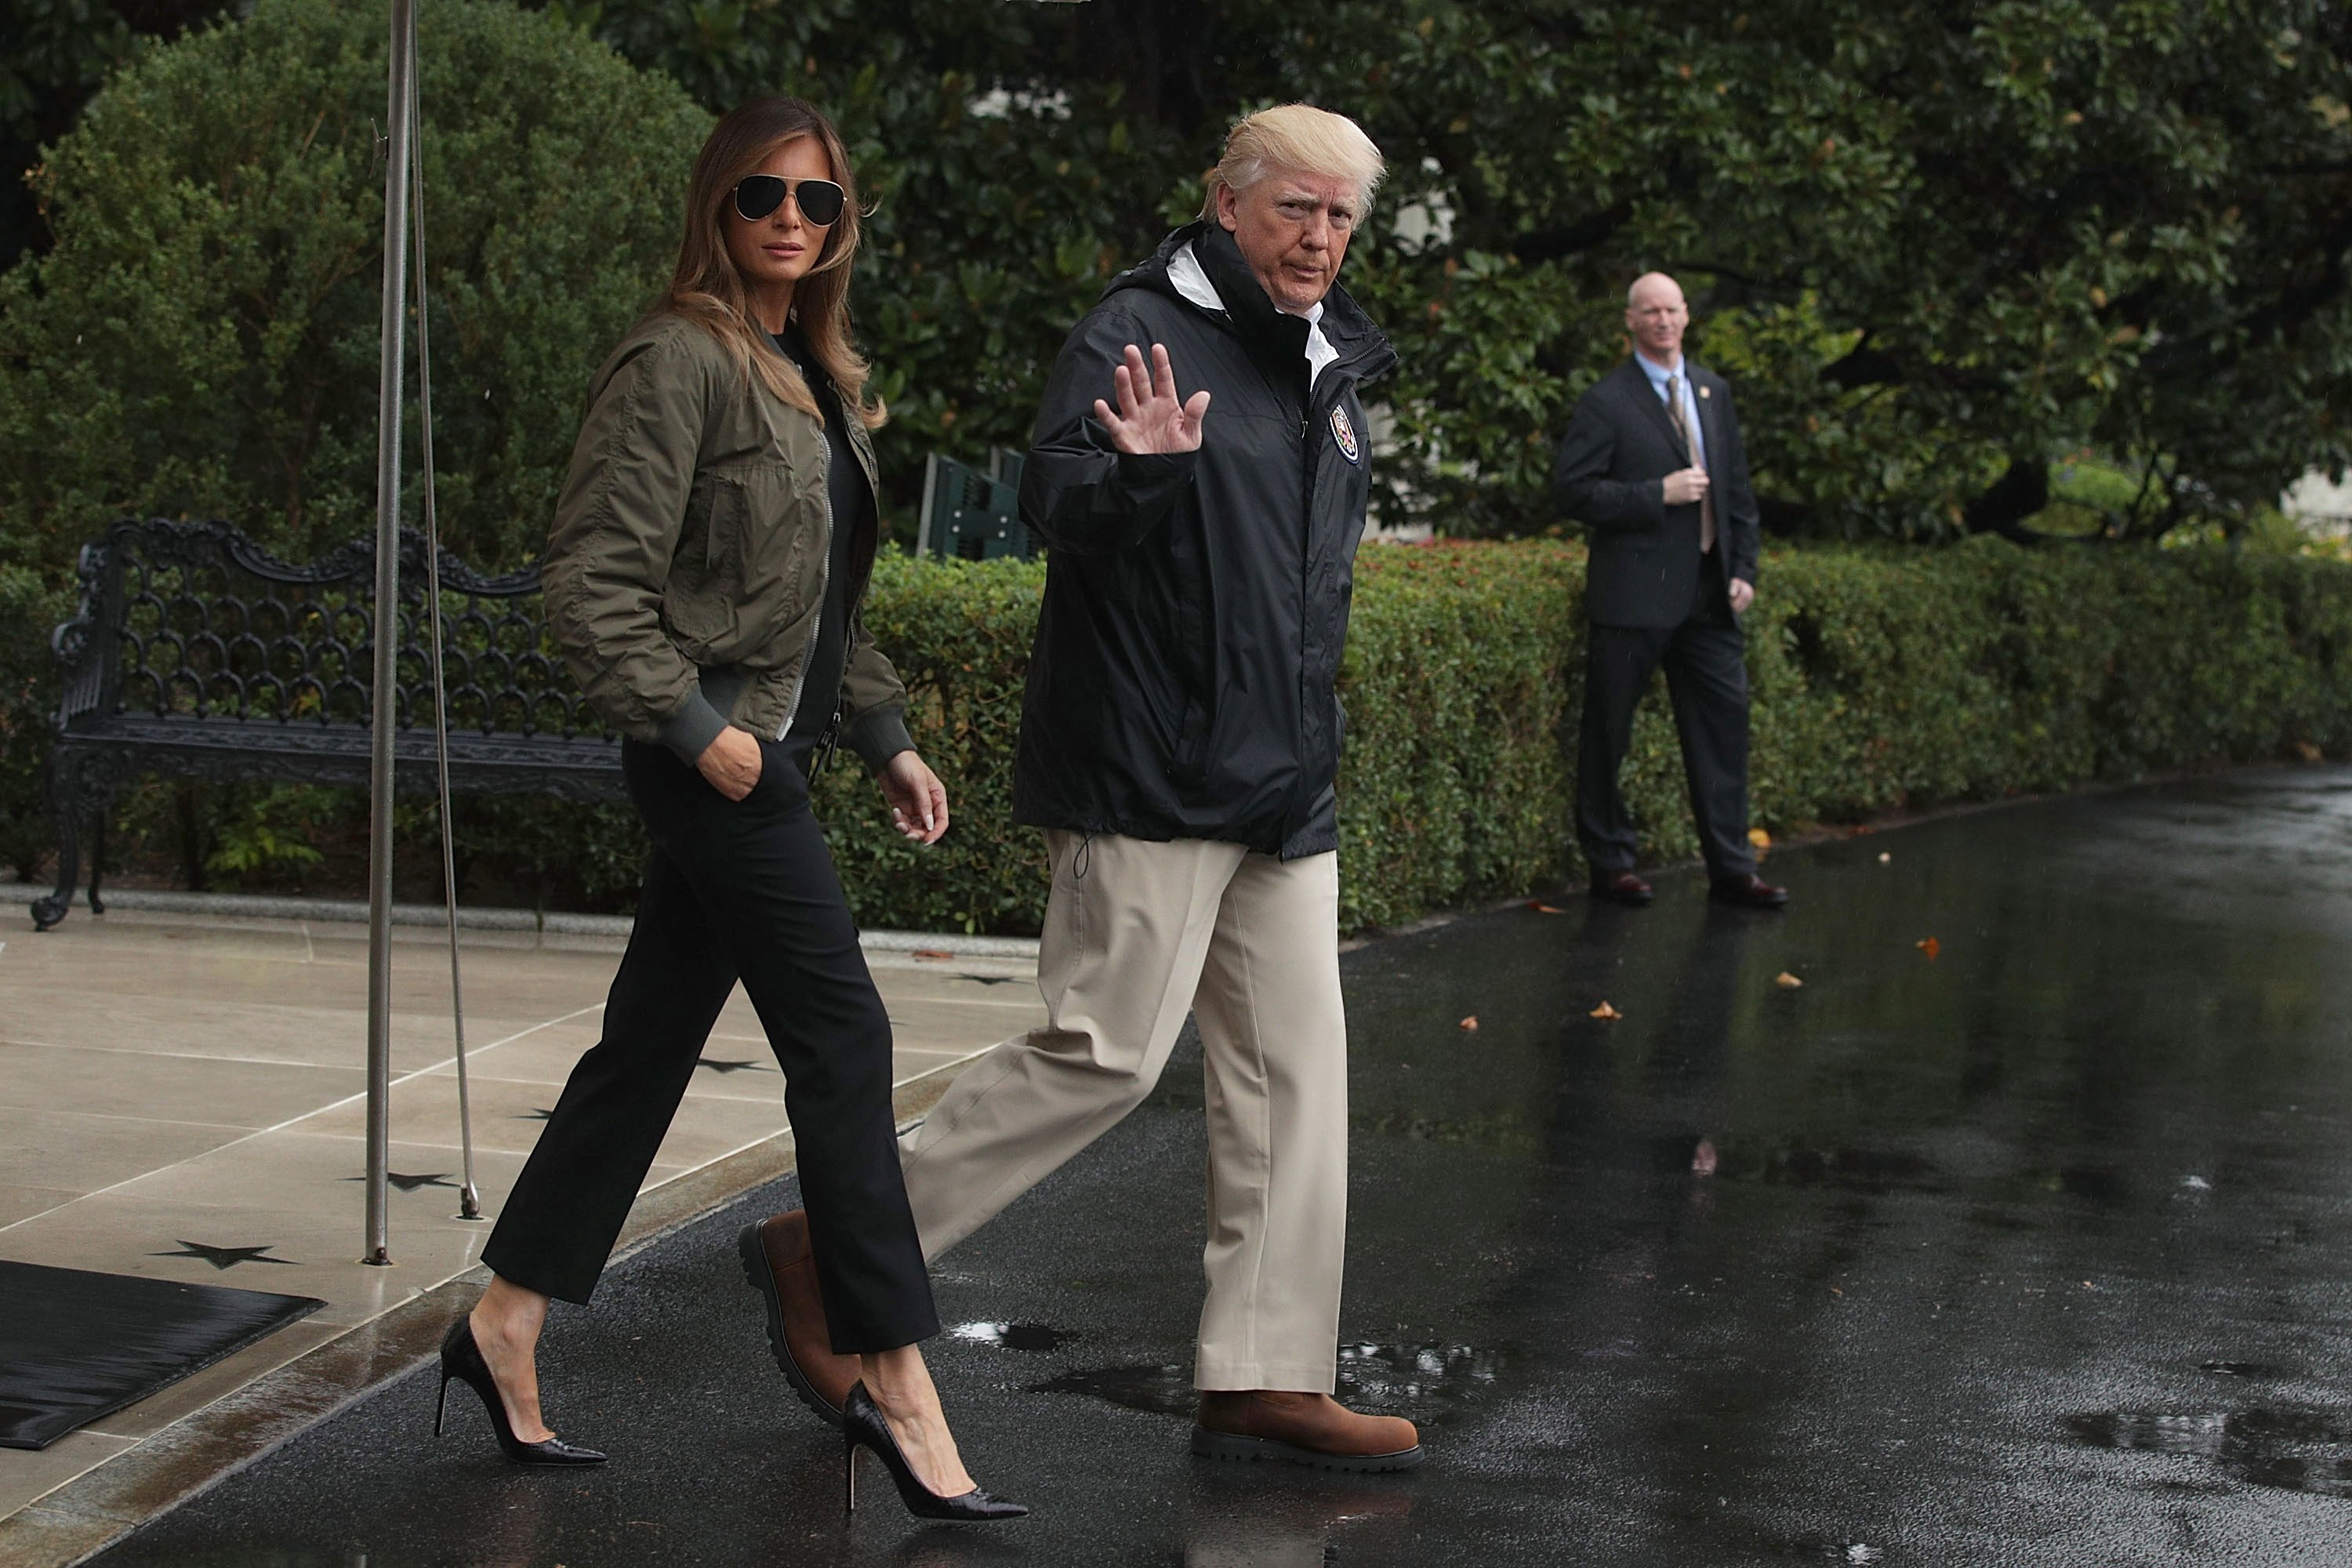 Donald and Melania Trump on their way to visit victims of Hurricane Harvey | Photo: Getty Images